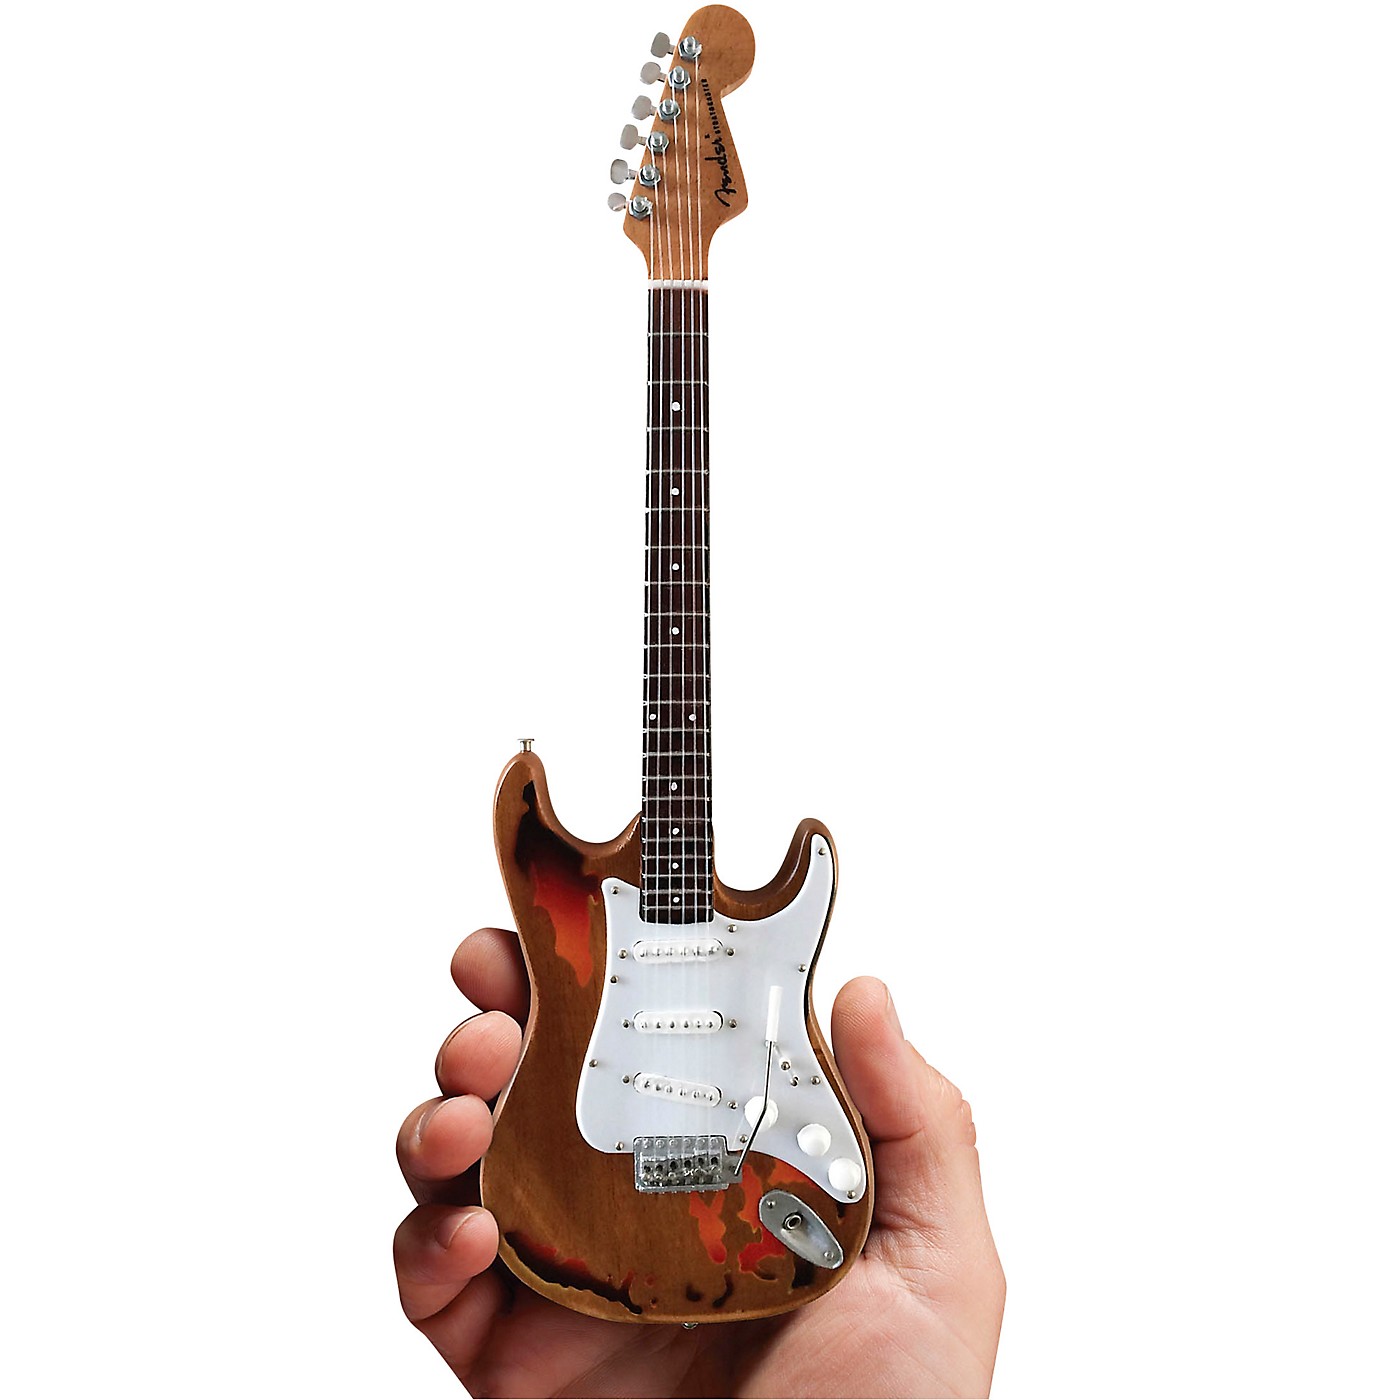 Axe Heaven Fender Stratocaster - Aged Sunburst Distressed Finish Officially Licensed Miniature Guitar Replica thumbnail